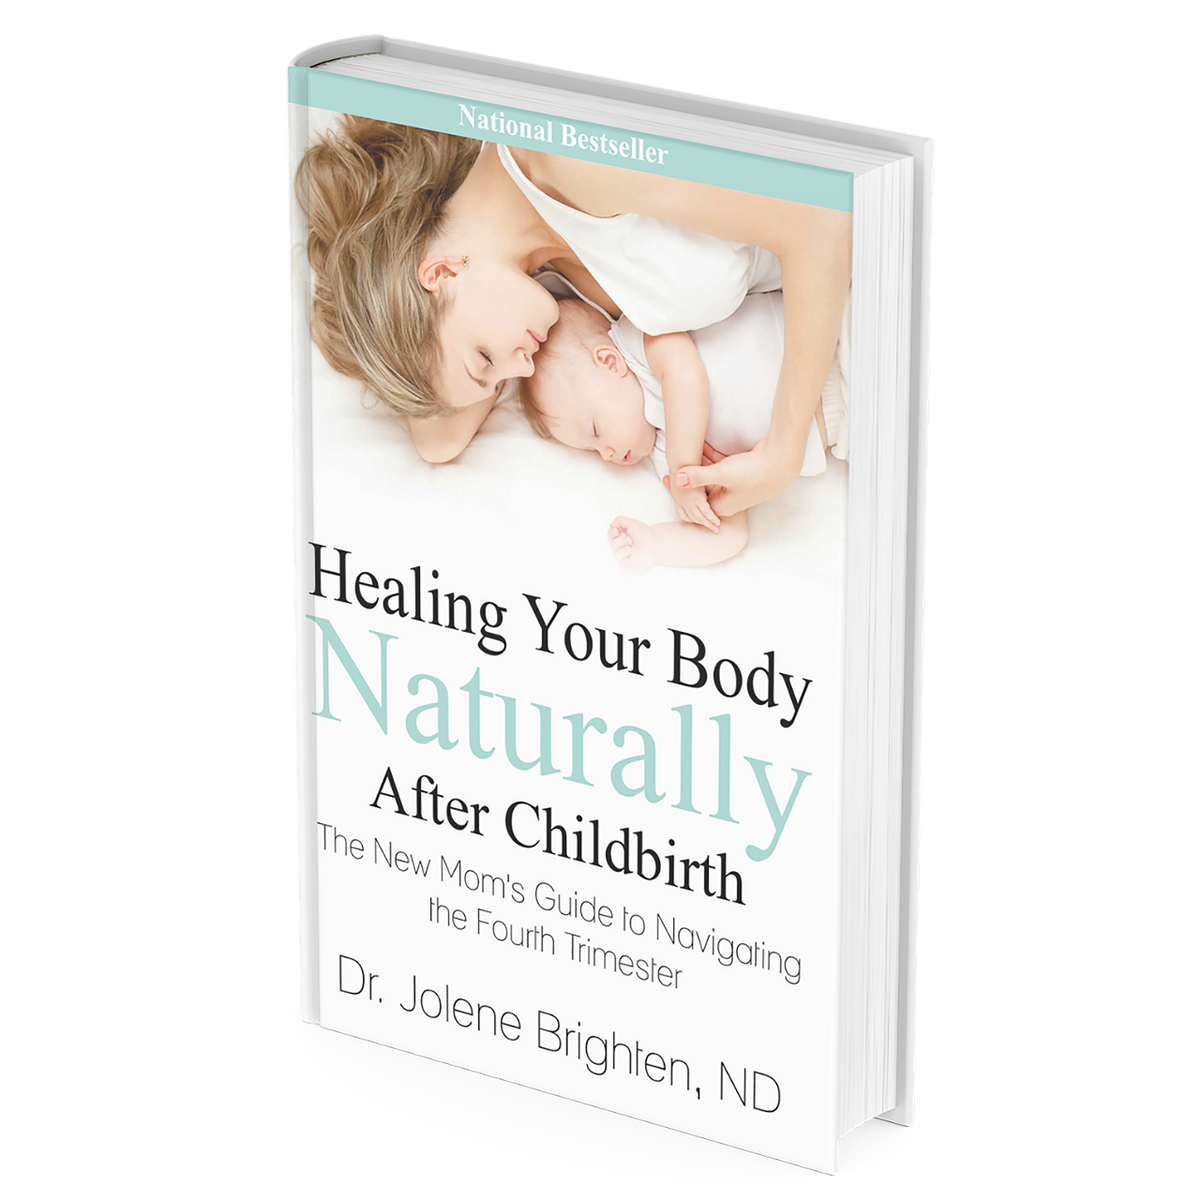 Healing Your Body Naturally After Childbirth: The New Mom's Guide to Navigating the Fourth Trimester